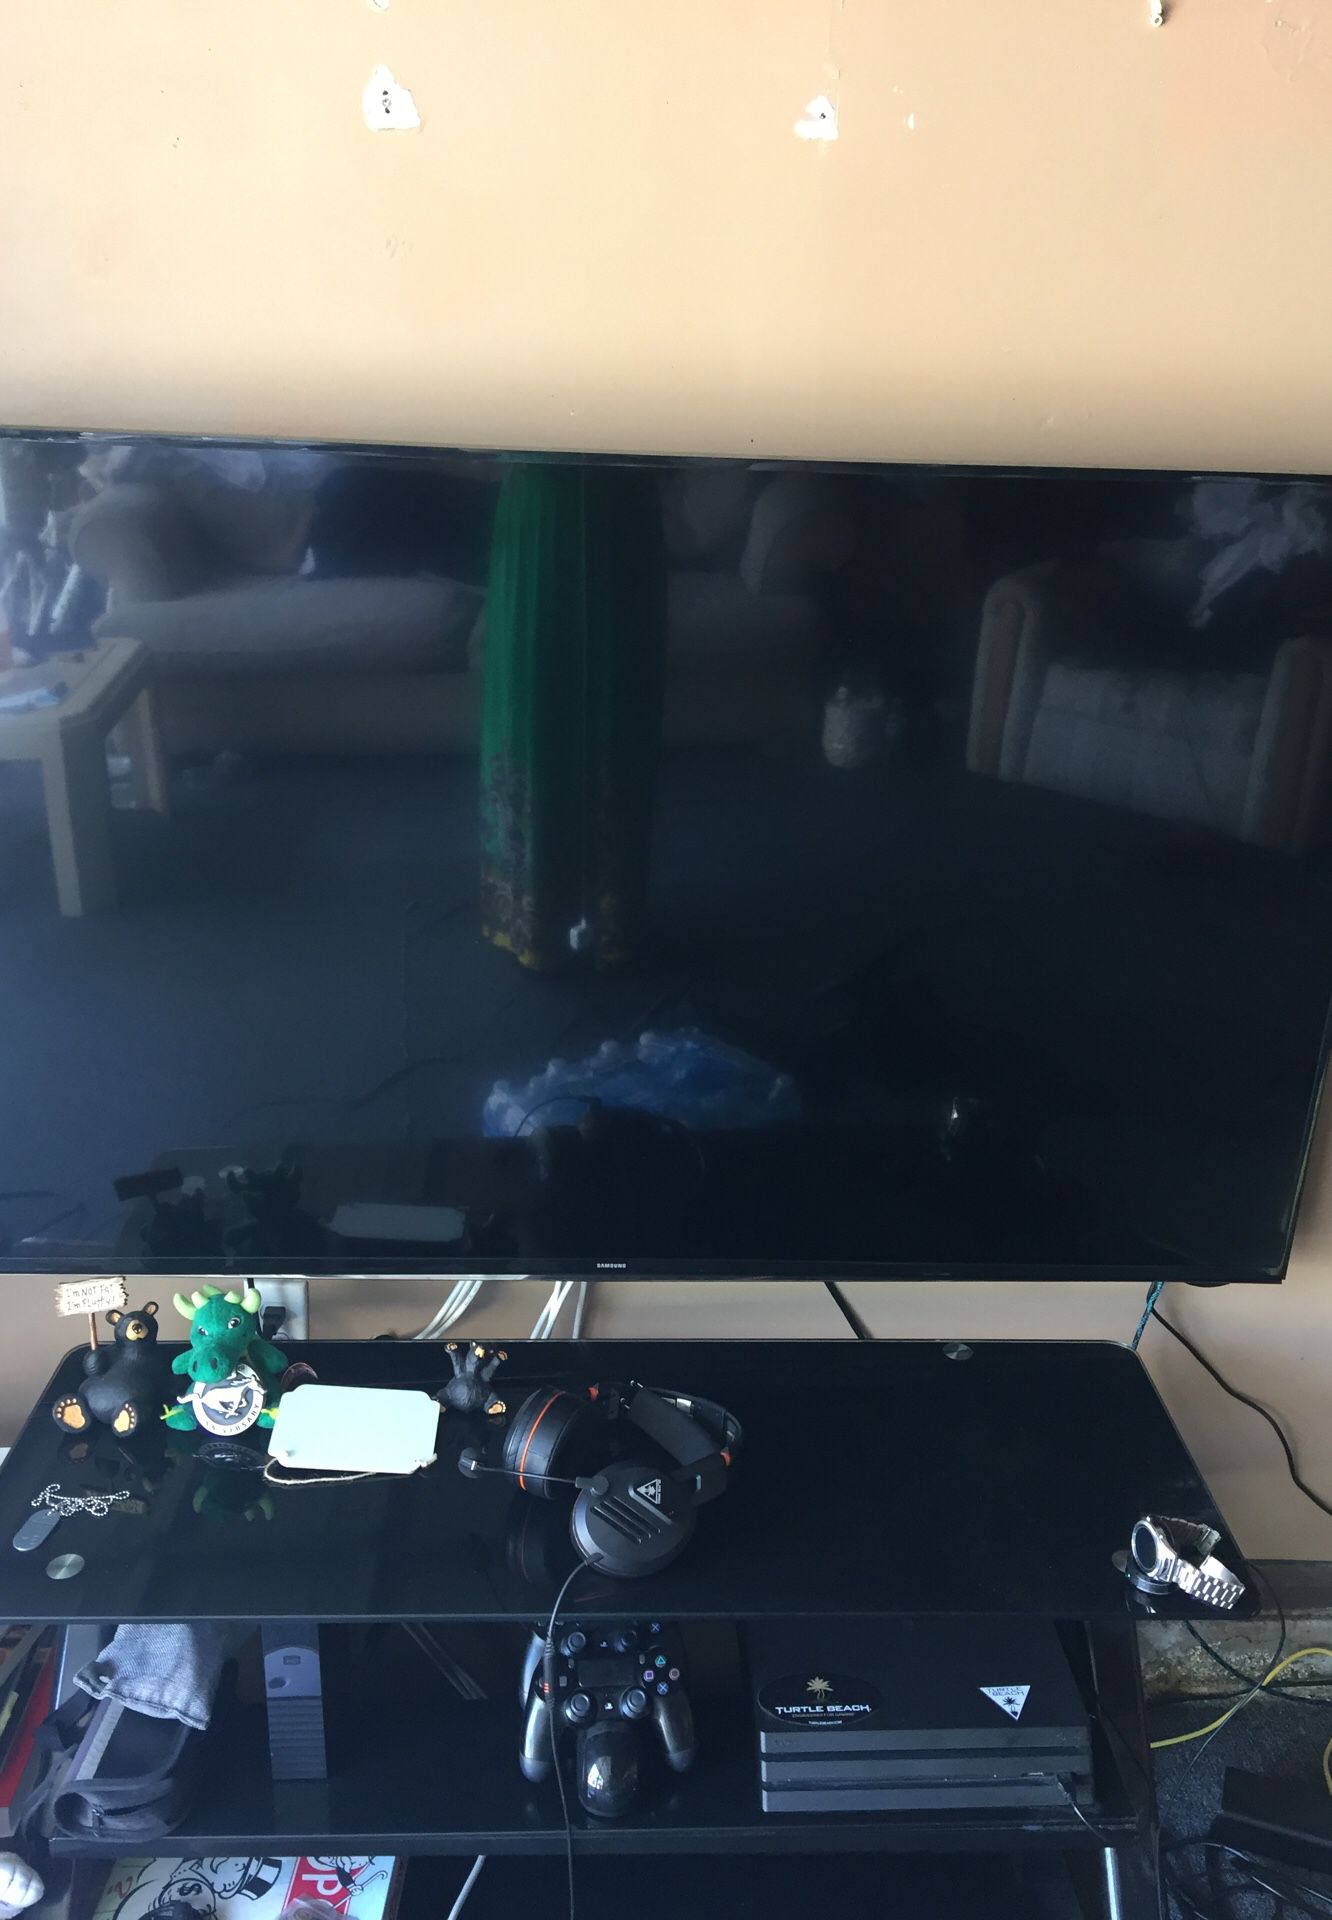 60” Samsung HD TV with TV Stand and connections.